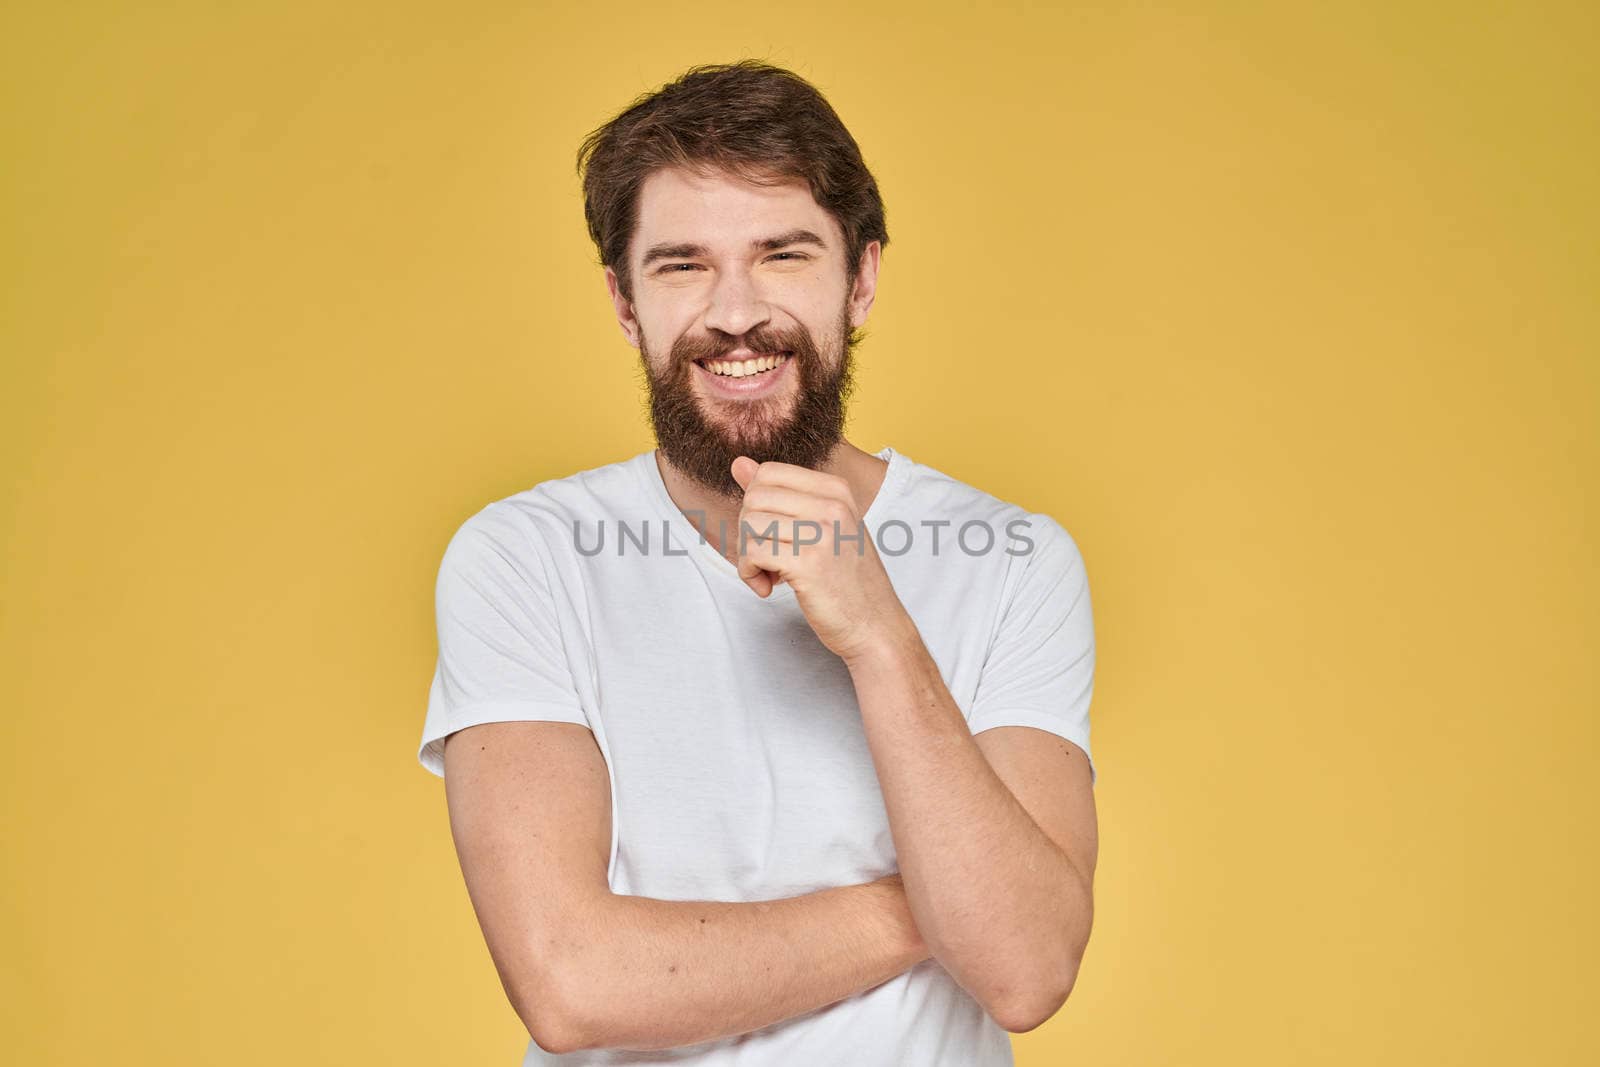 Bearded man on emotions white t-shirt fun lifestyle yellow background. High quality photo